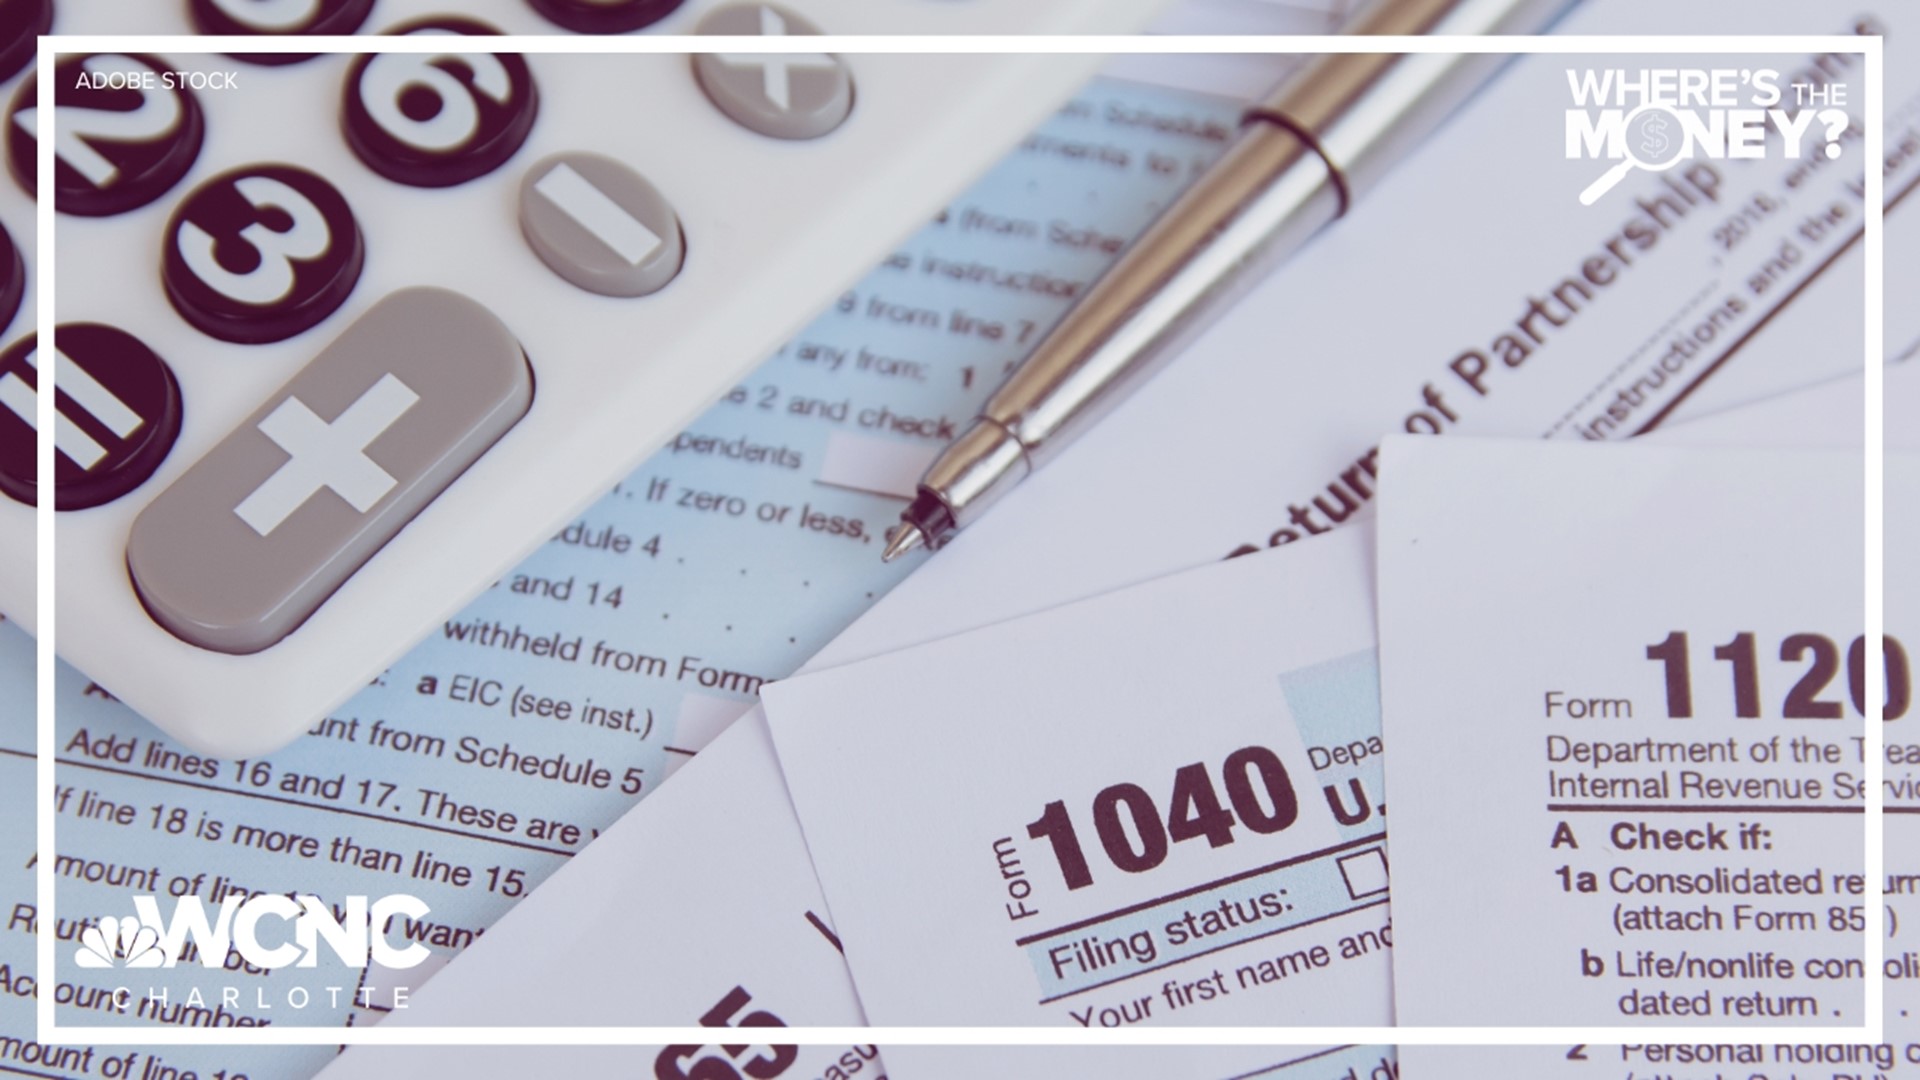 Tax Day is less than a week away, and many people might think it's too late to reduce what they owe or increase their refund.